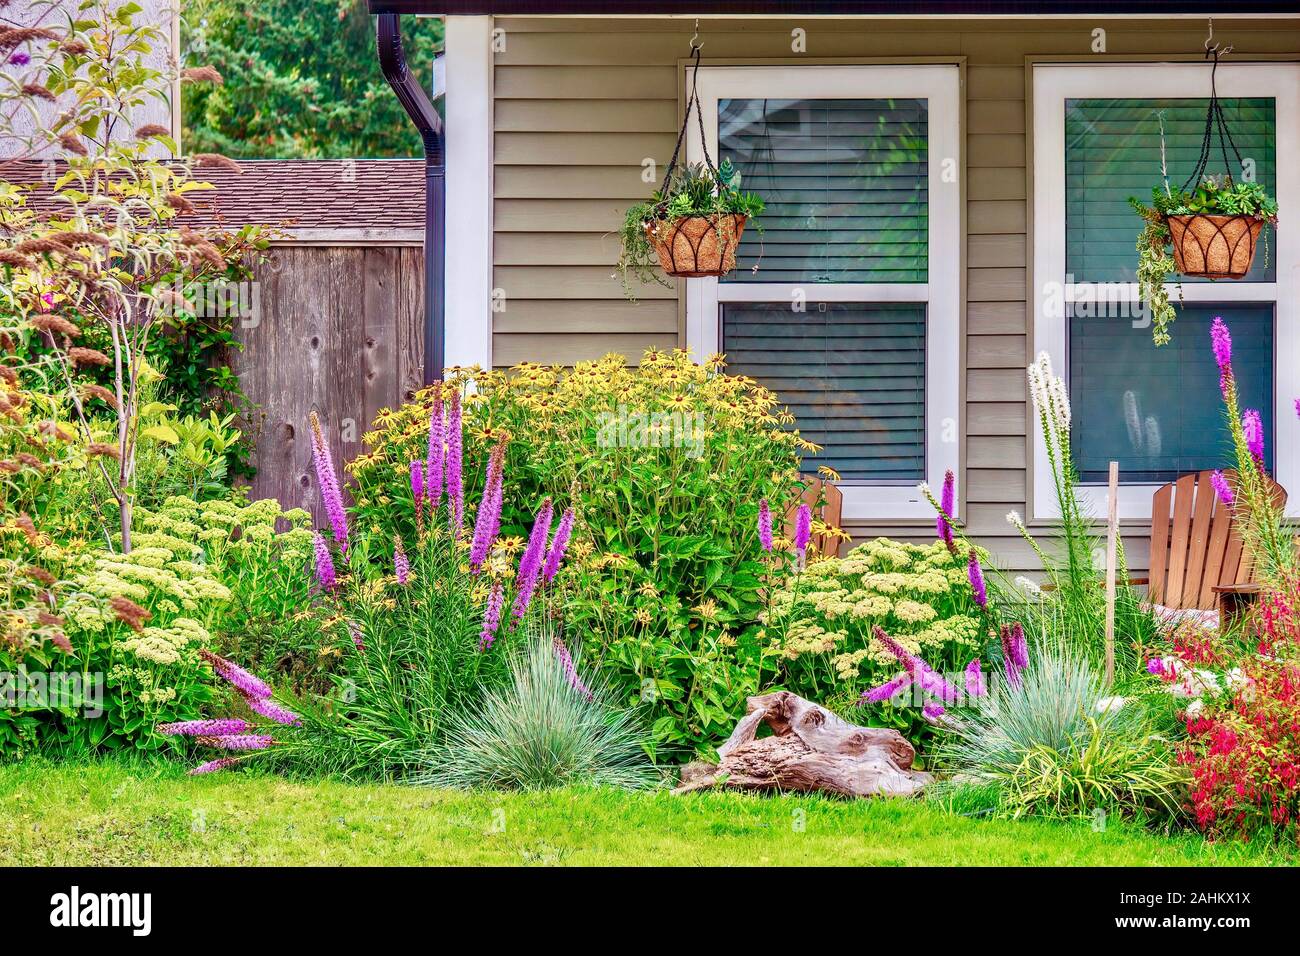 Street view of flowers blooming in a pretty and colorful summer garden in front of a suburban house near Vancouver, Canada. Stock Photo